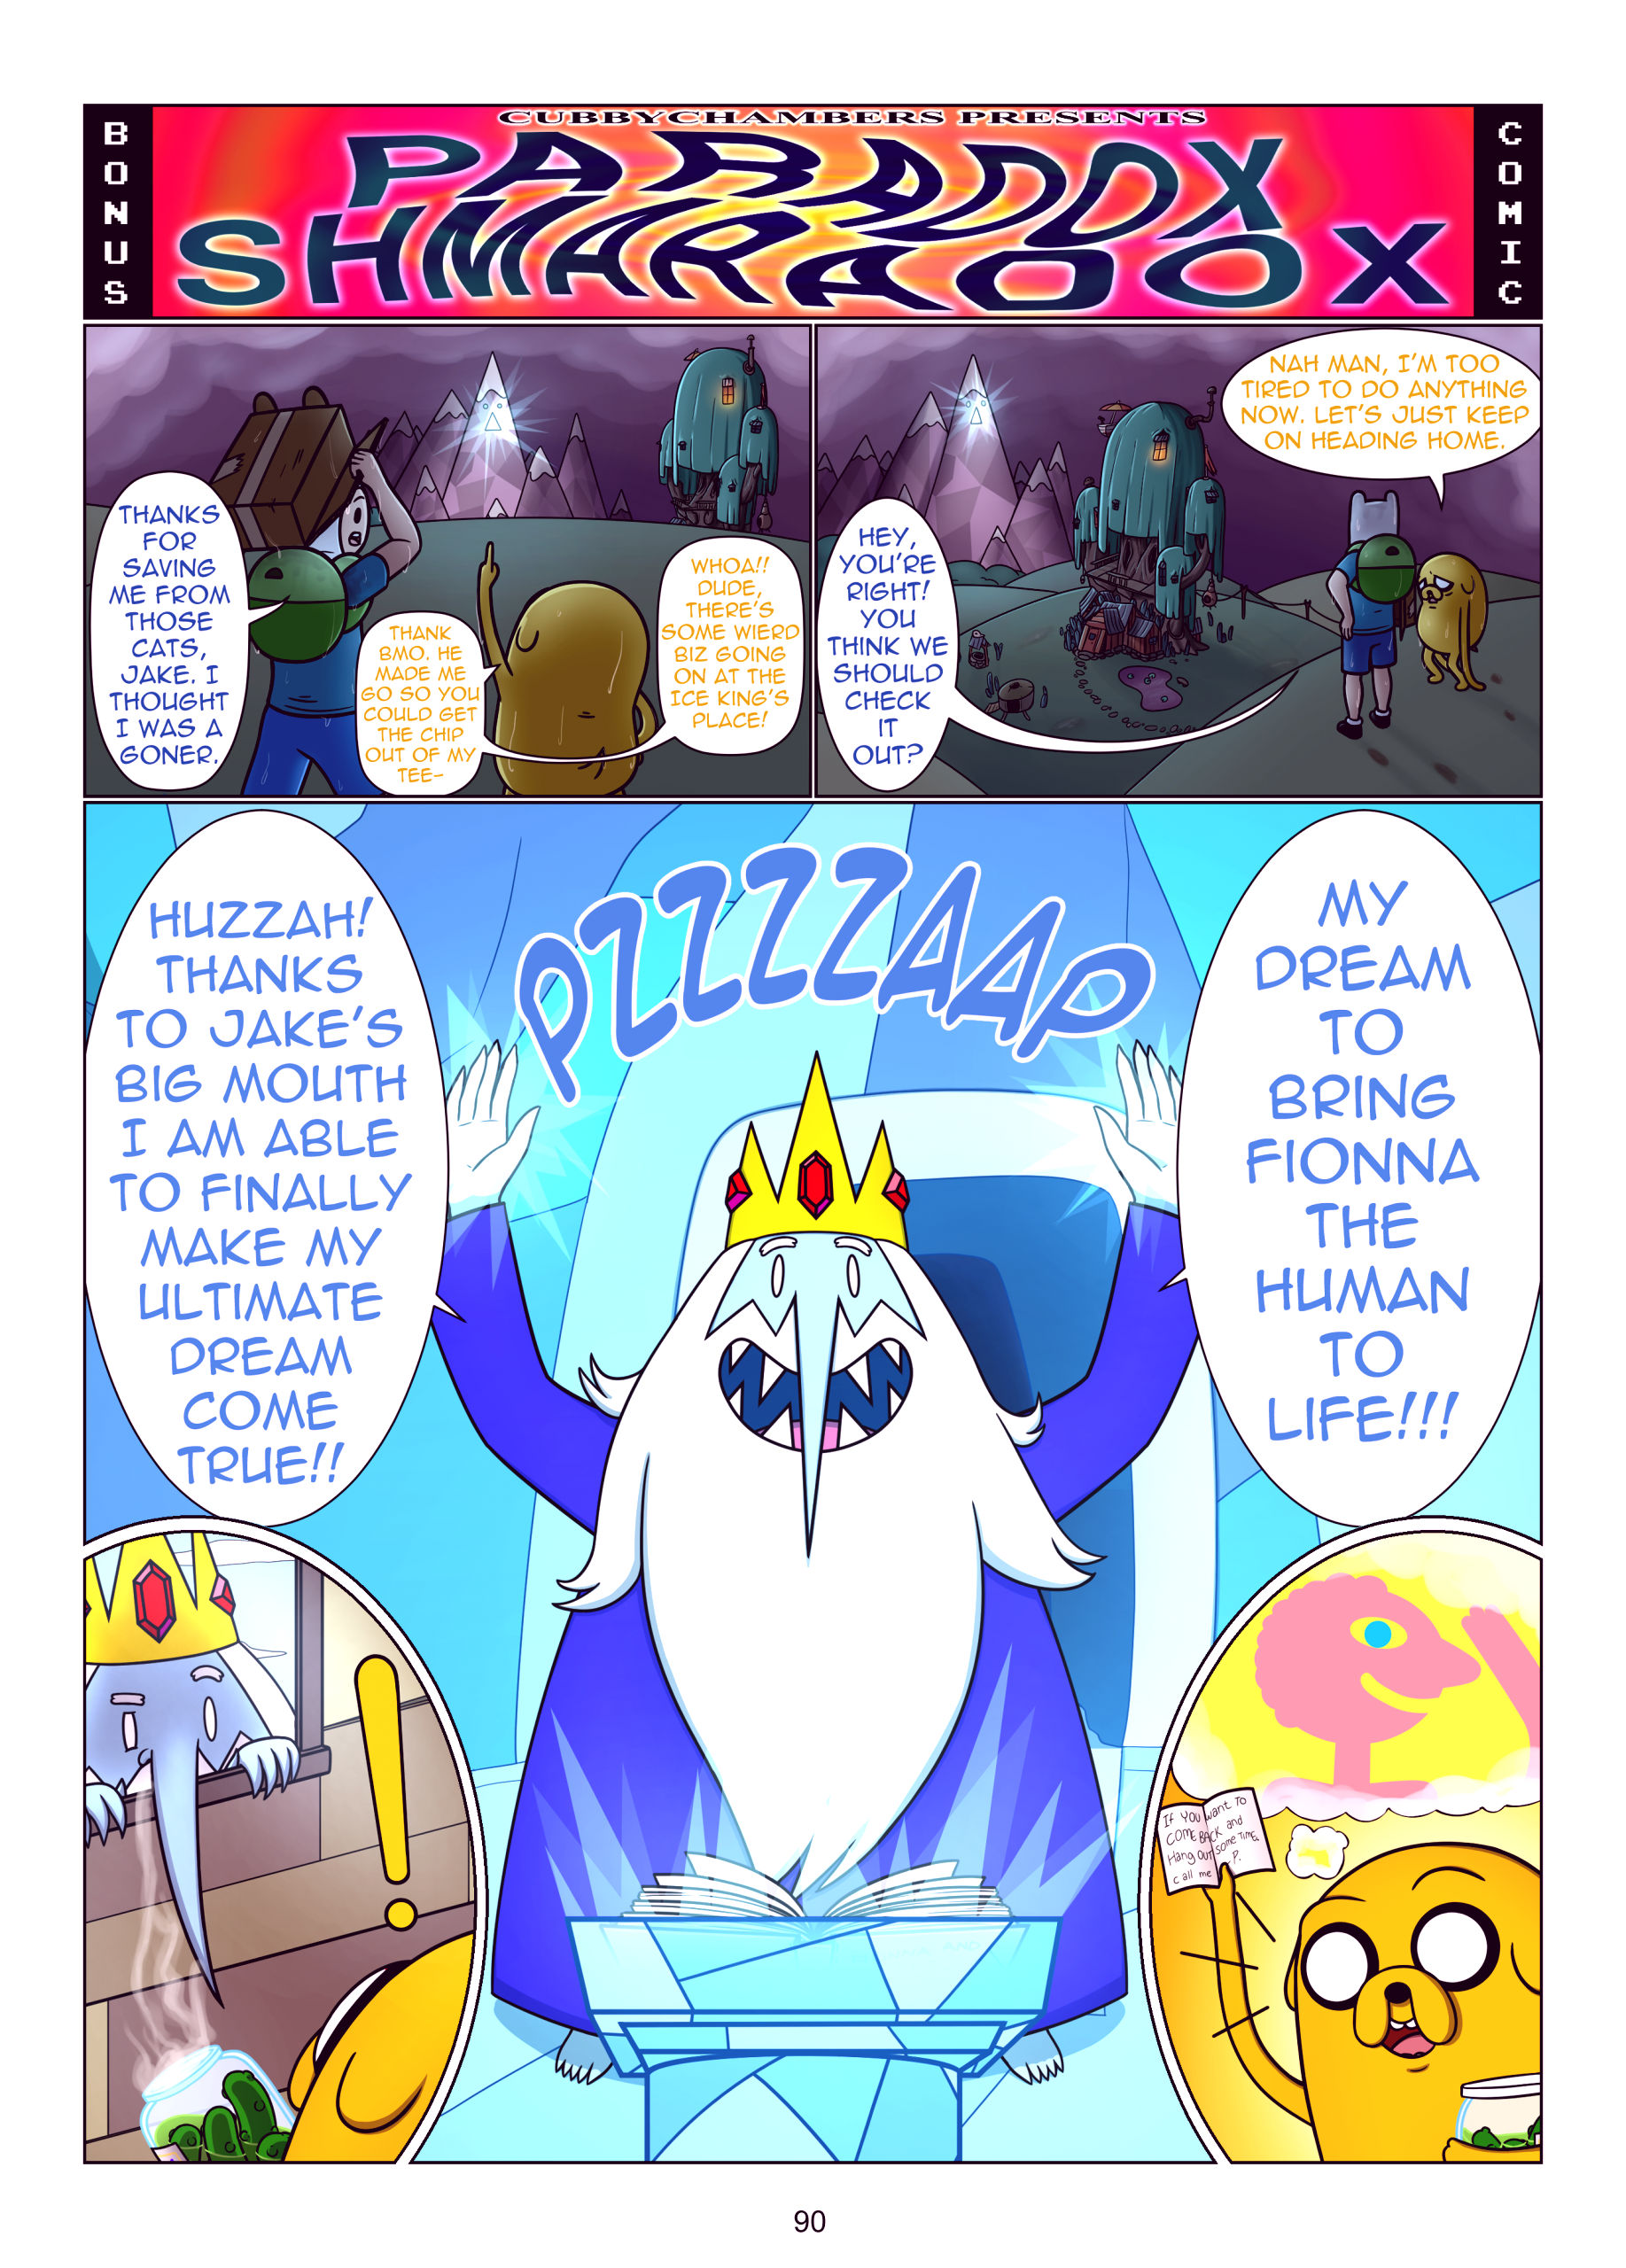 Misadventure time the collection porn comic picture 91